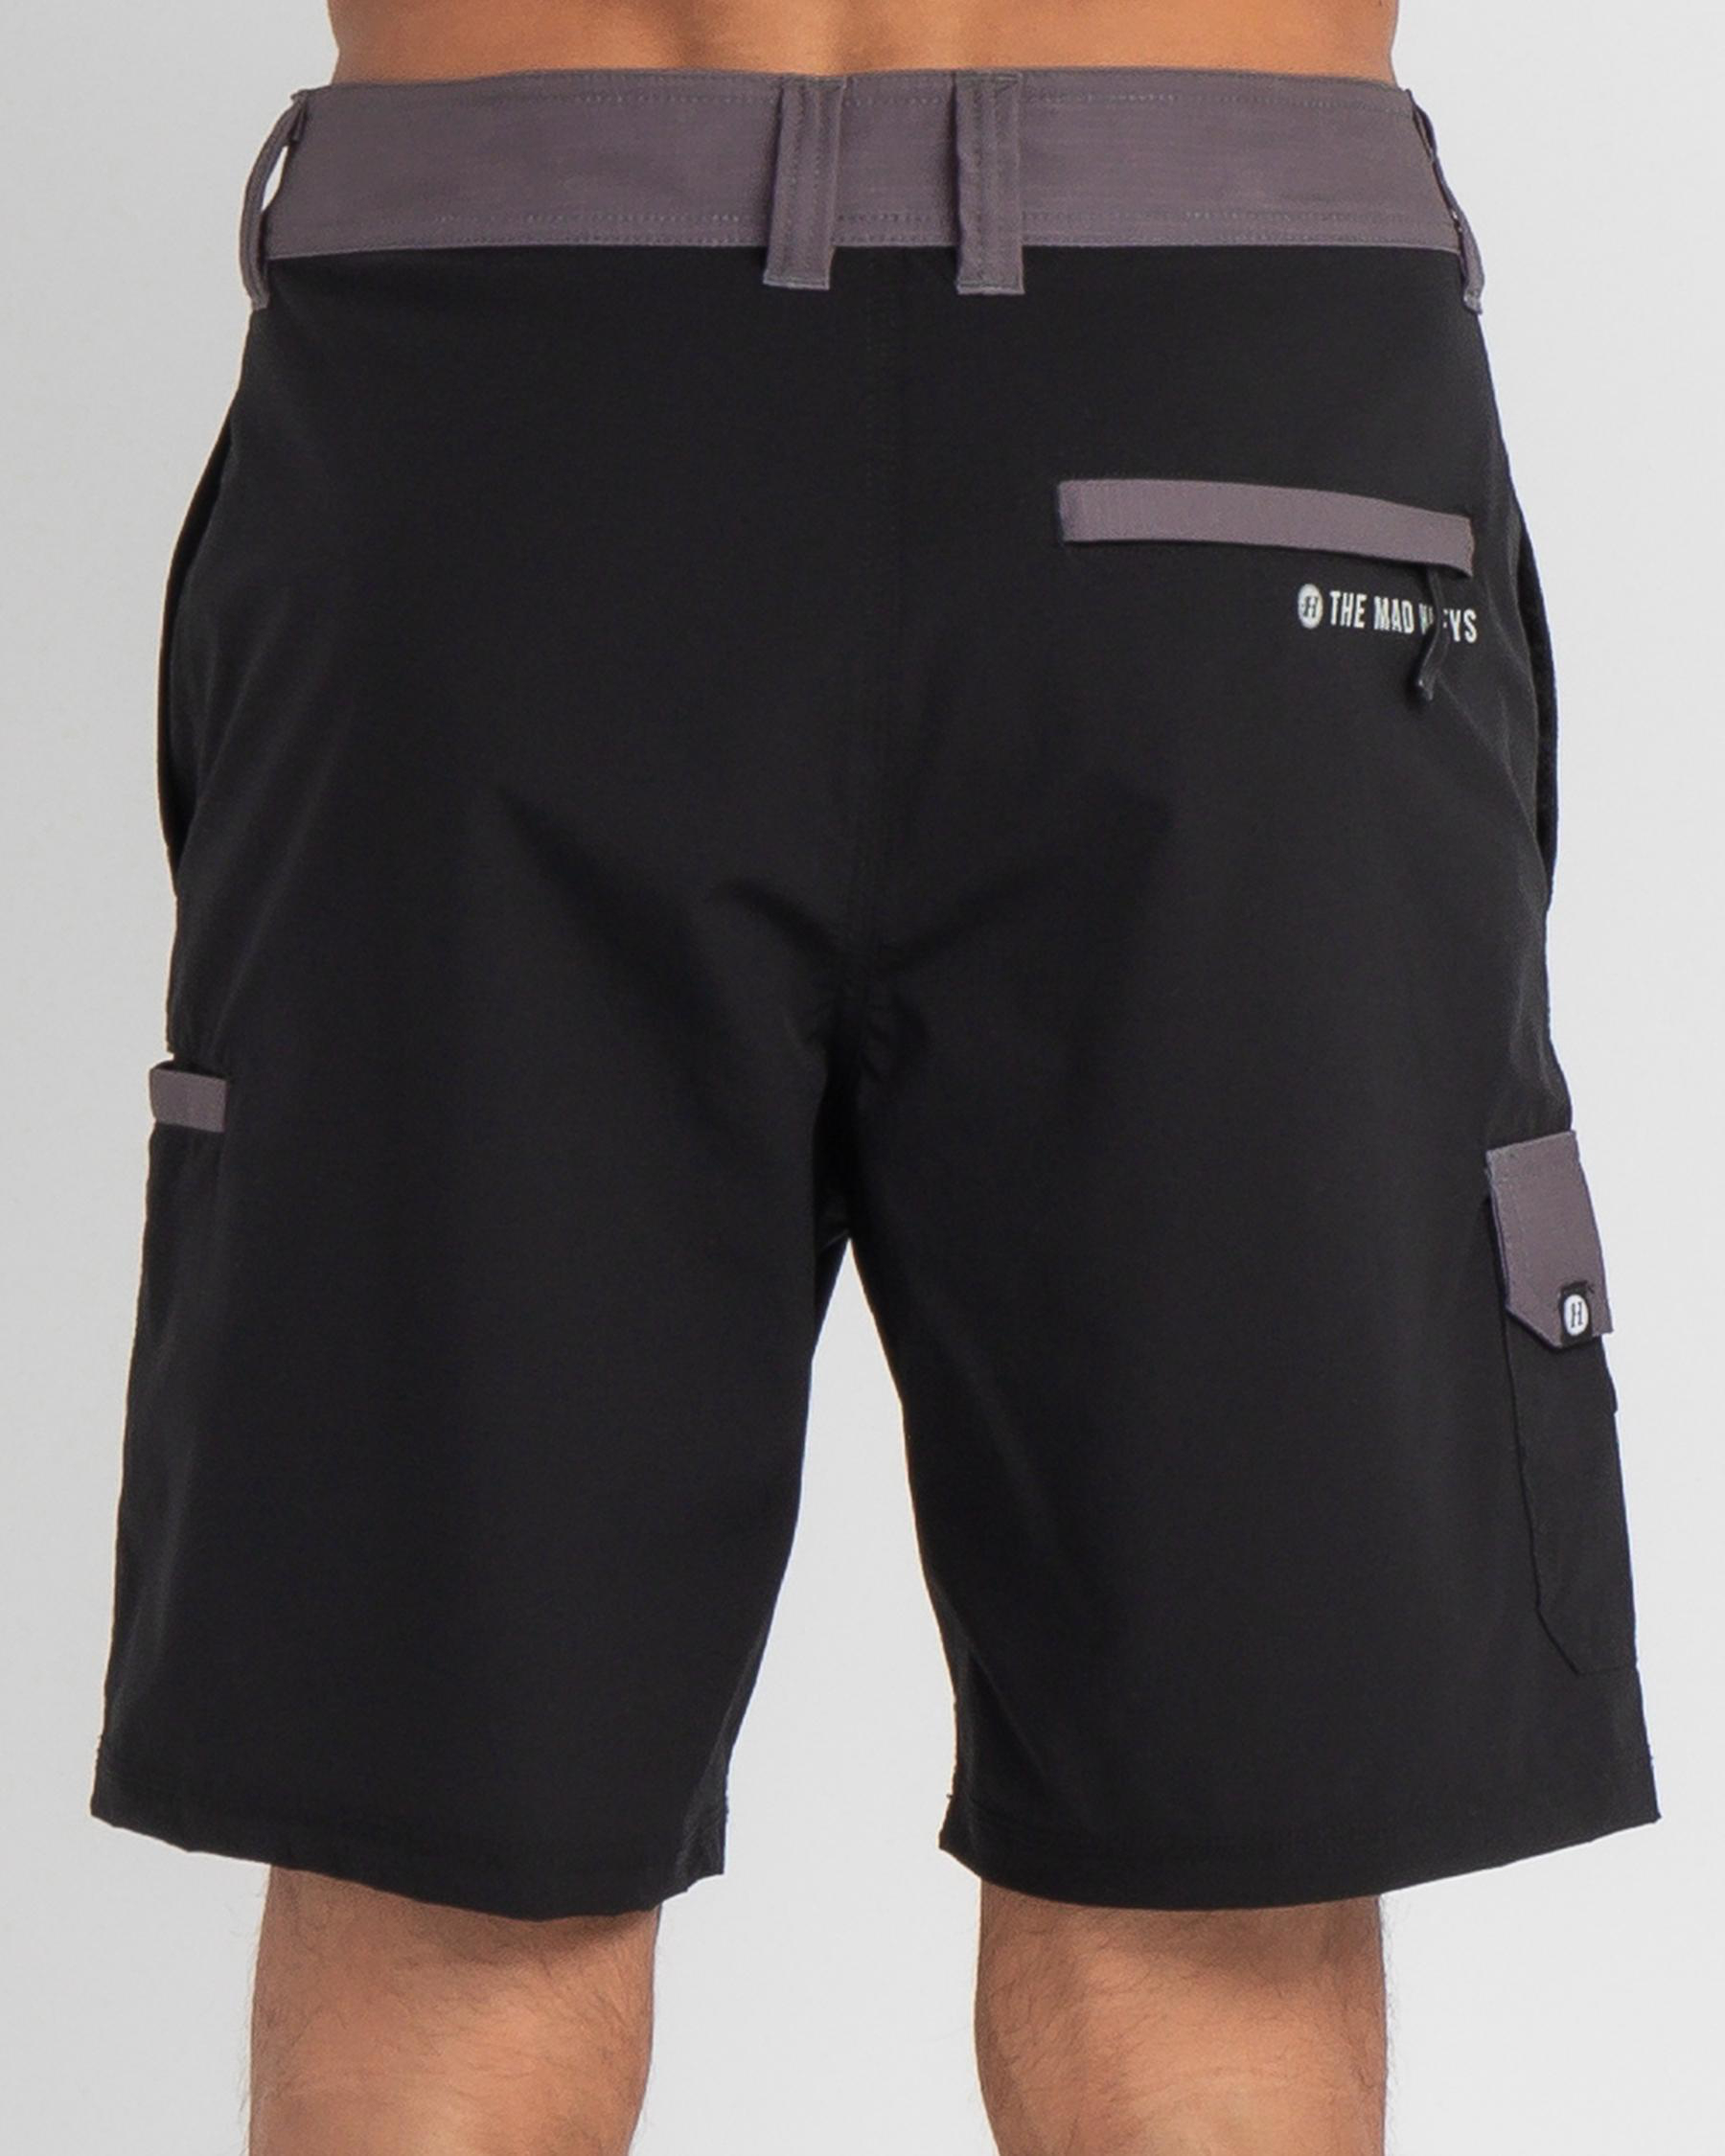 Shop The Mad Hueys Cross Breed Hybrid Shorts In Black - Fast Shipping ...